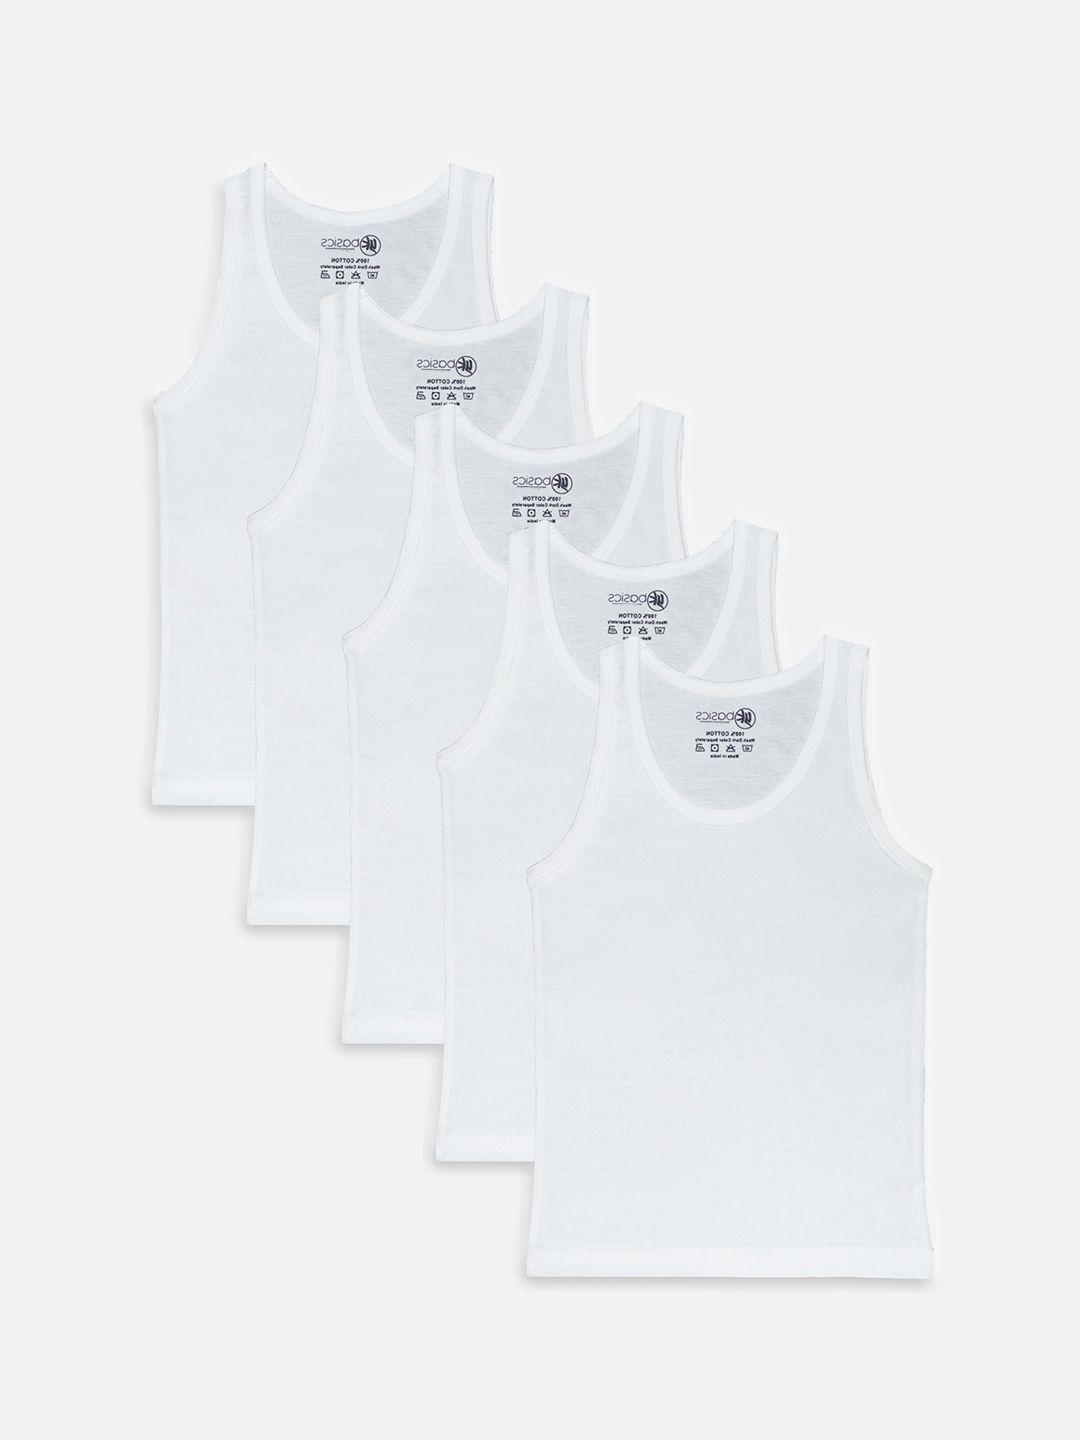 yk basics kids pack of 5 white solid pure cotton innerwear vests